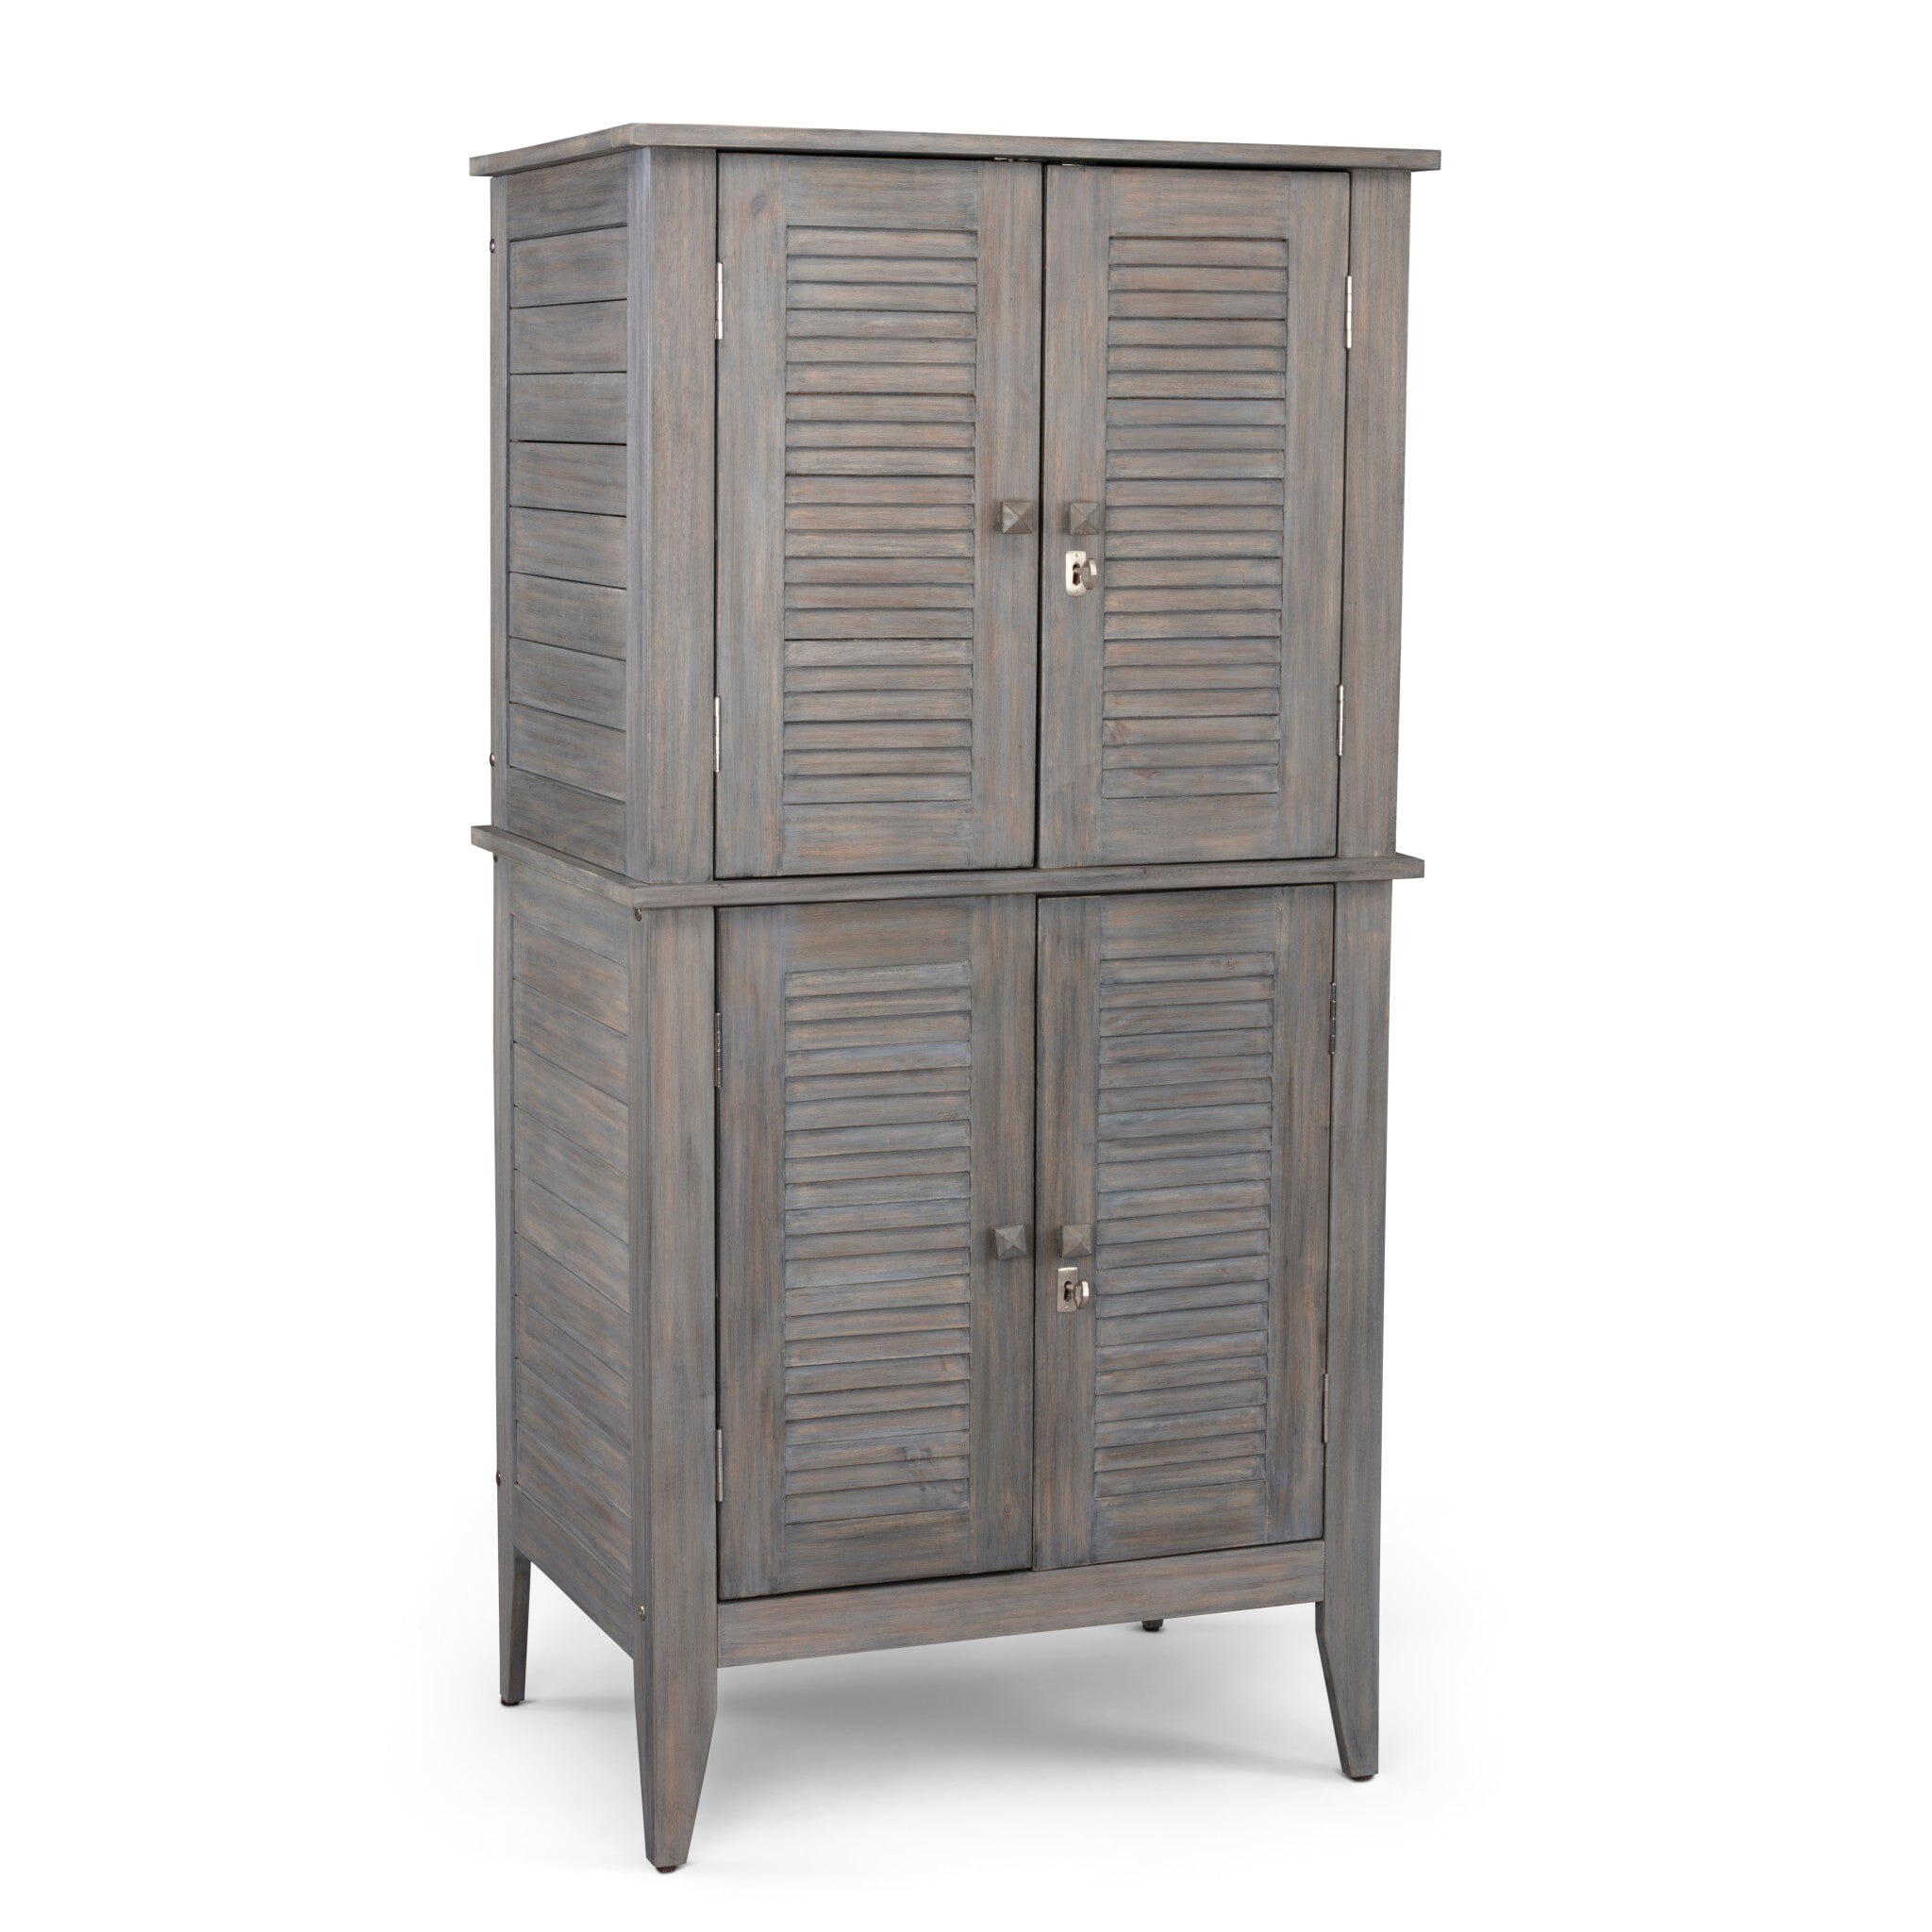 Traditional Storage Cabinet By Maho Storage Cabinet Maho